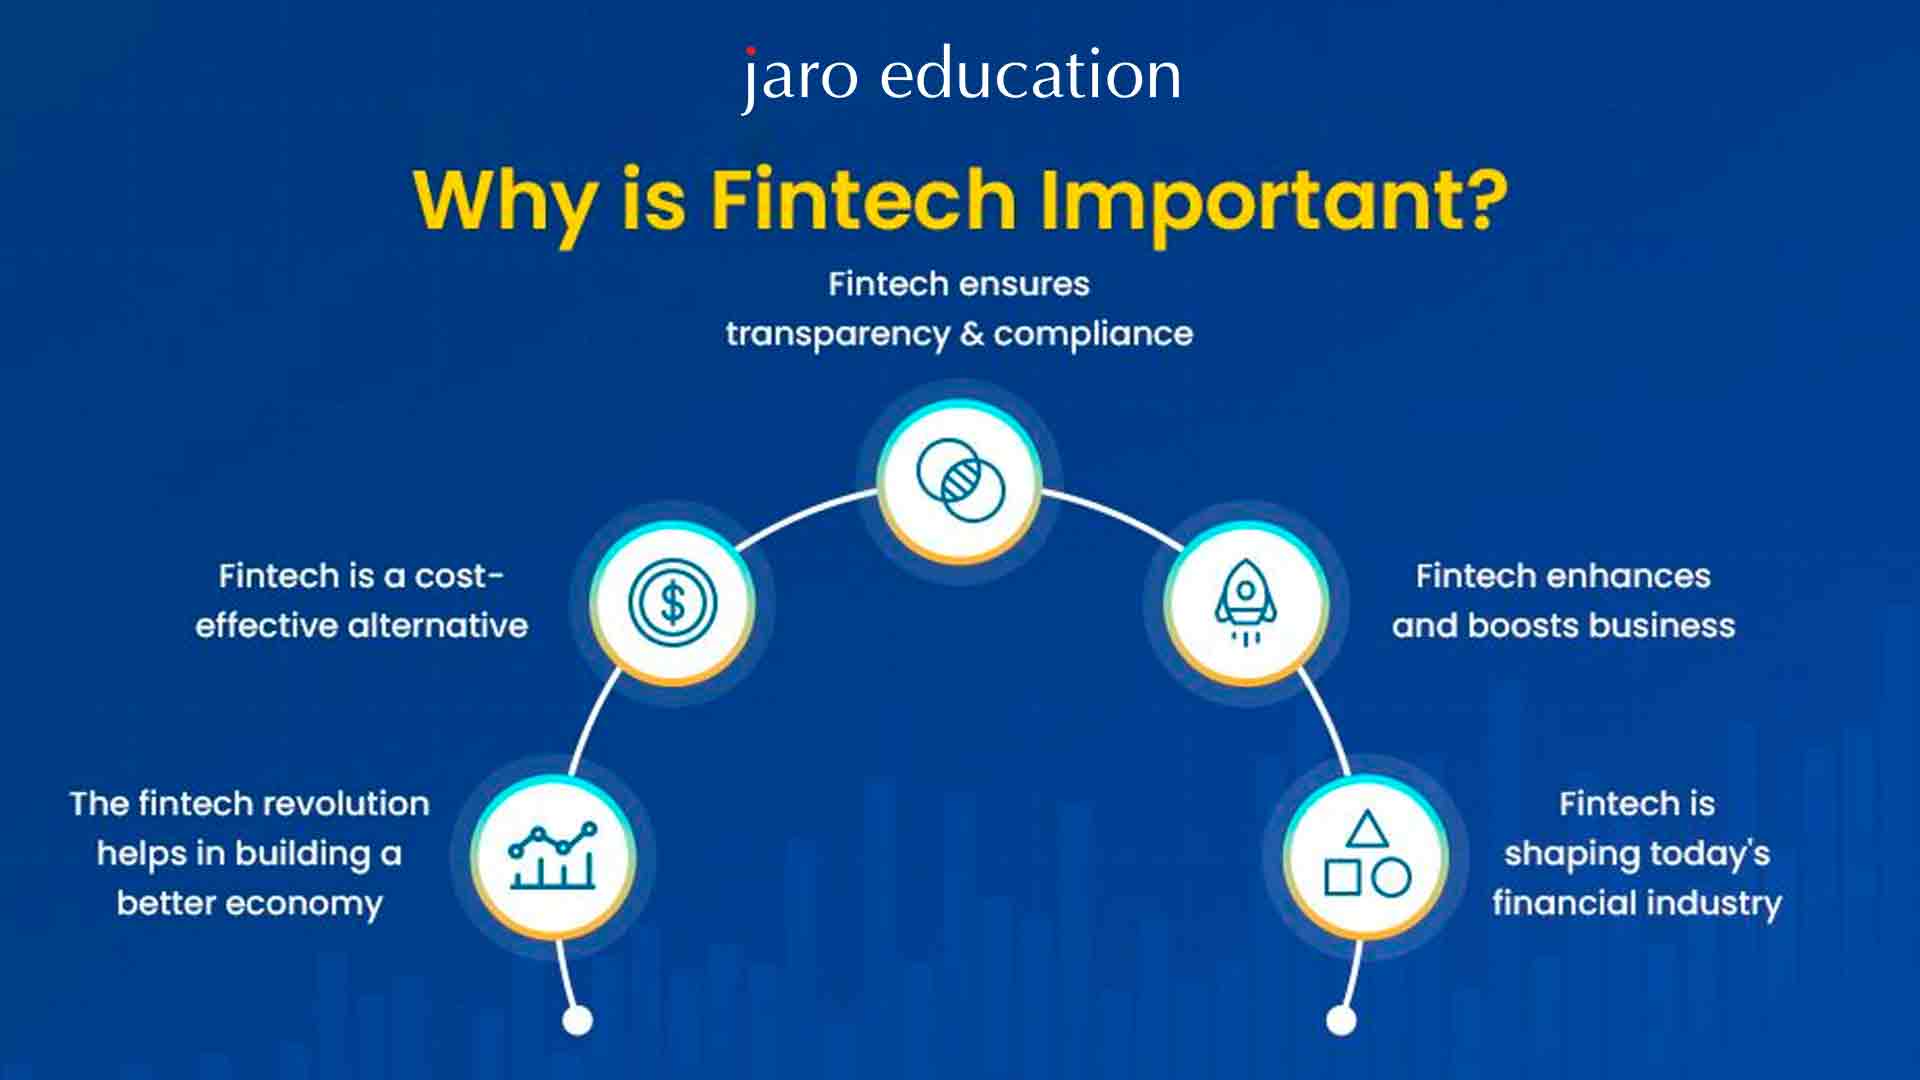 Why is Fintech important?